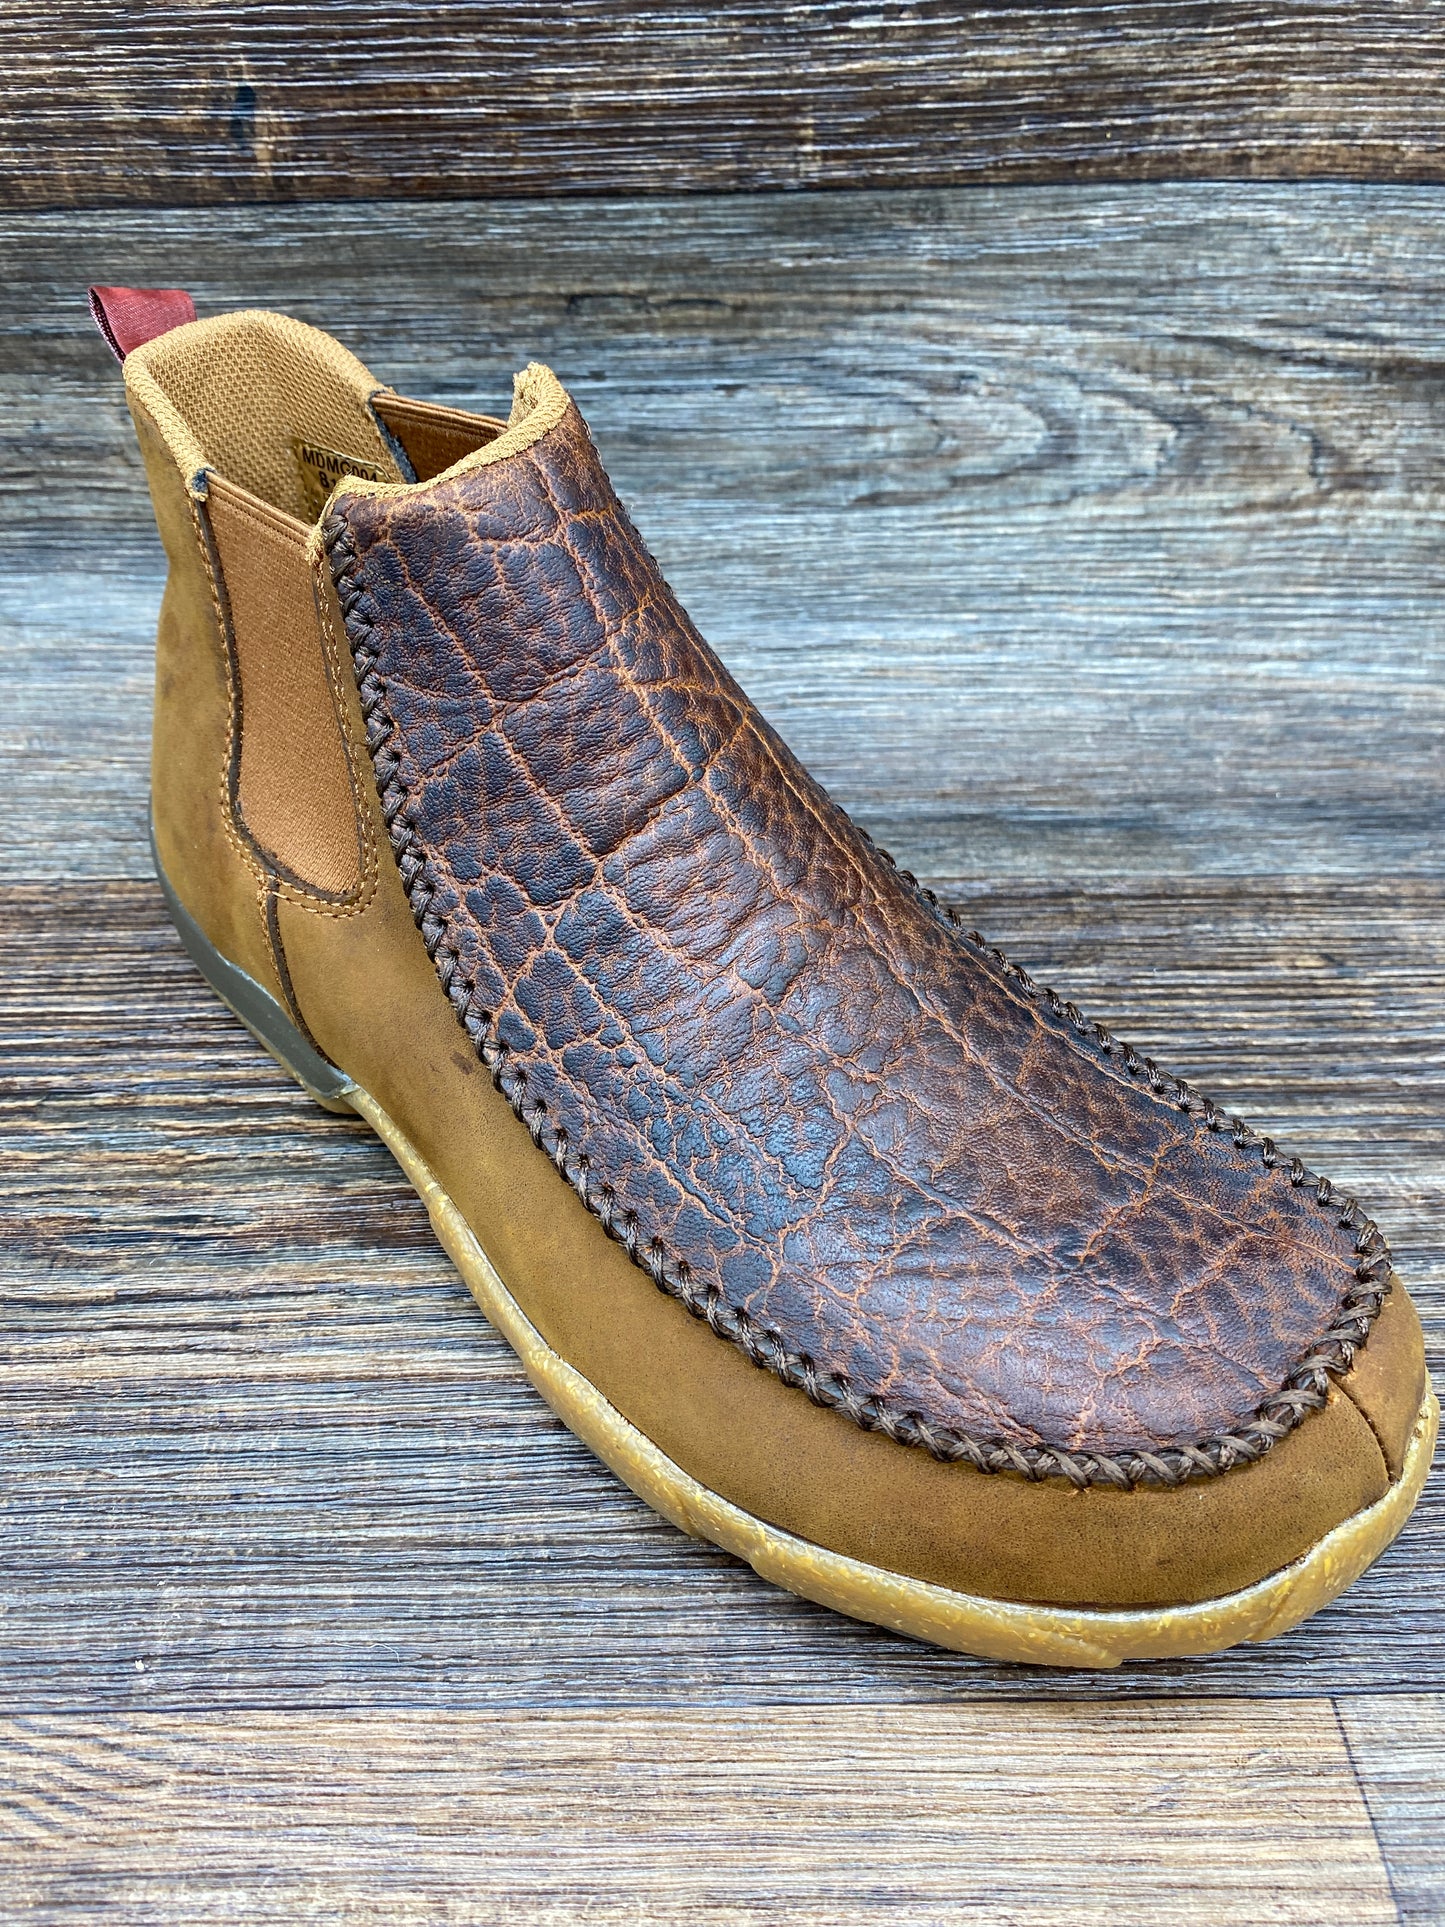 mdmg004 Men's 4" Chelsea Driving Moc by Twisted X